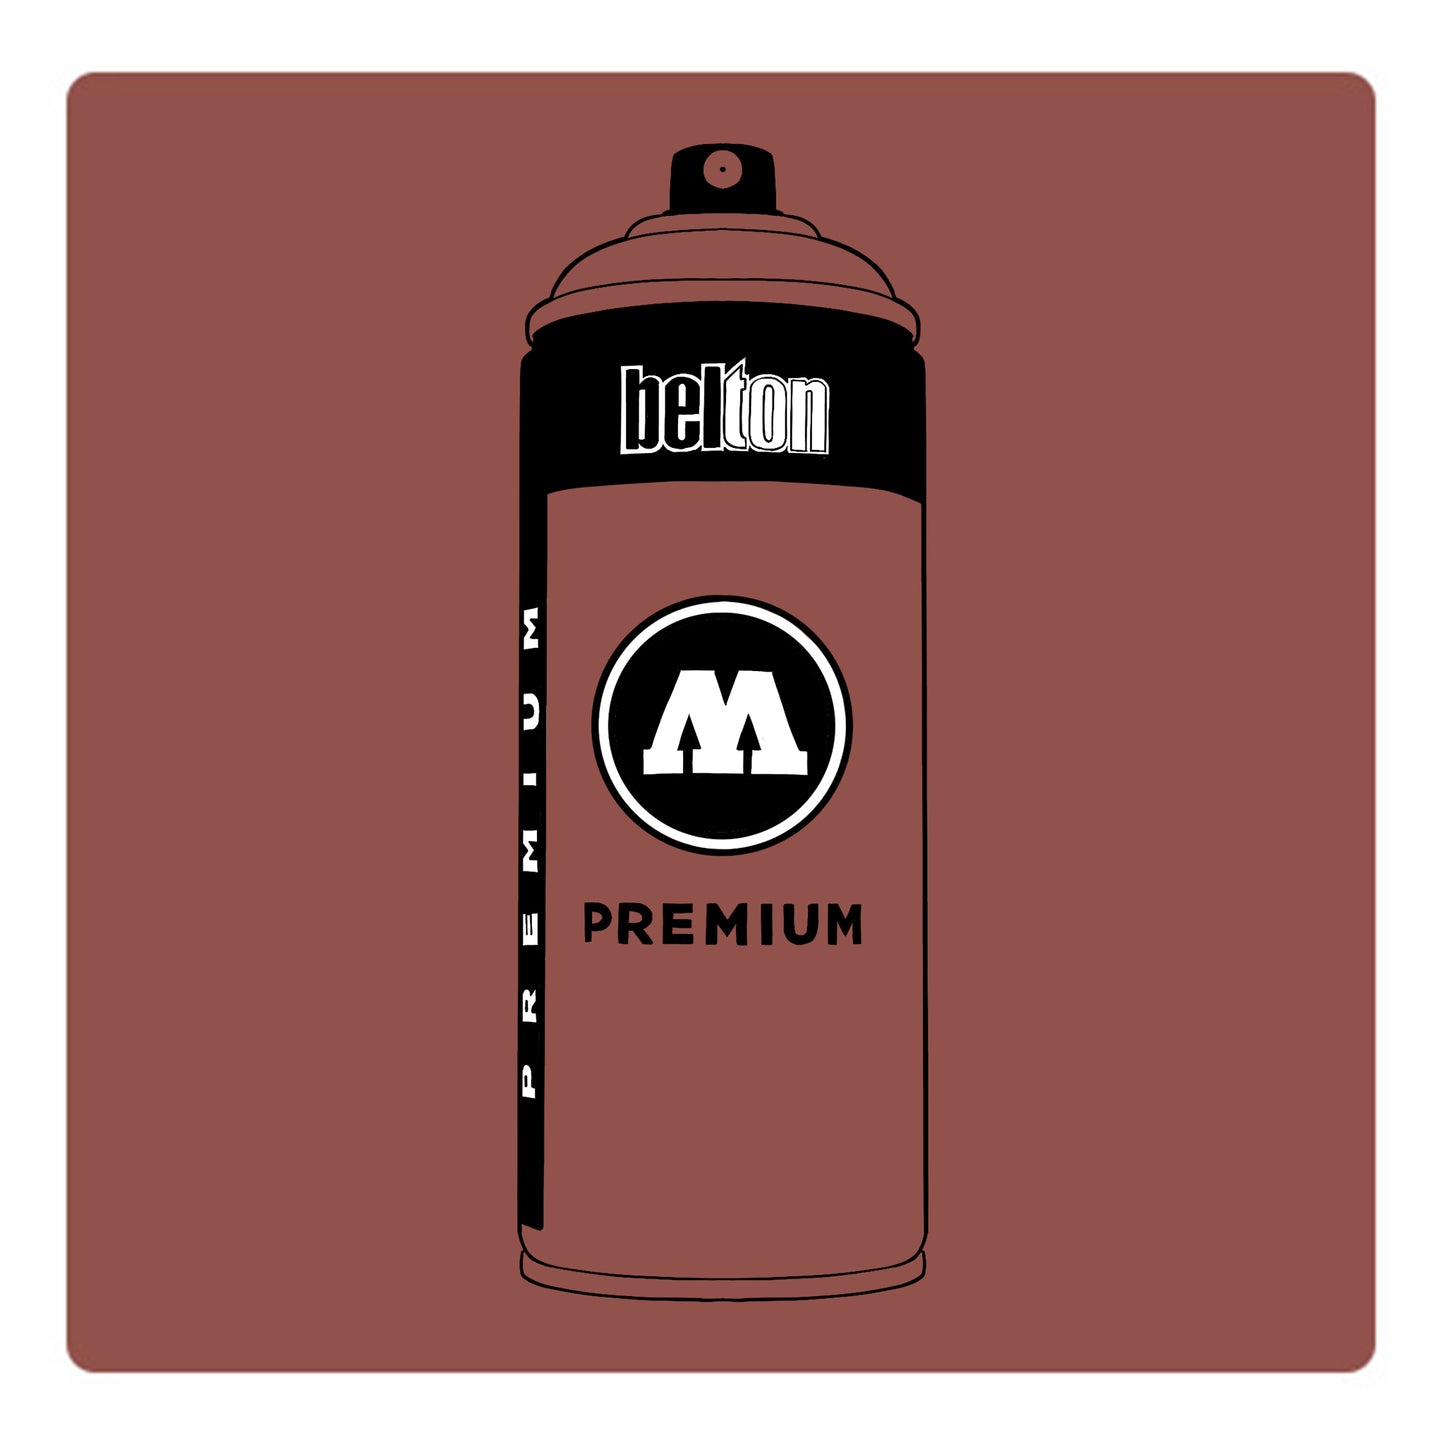 A black outline drawing of a rosy brown spray paint can with the words "belton","premium" and the letter"M" written on the face in black and white font. The background is a color swatch of the same rosy brown with a white border.